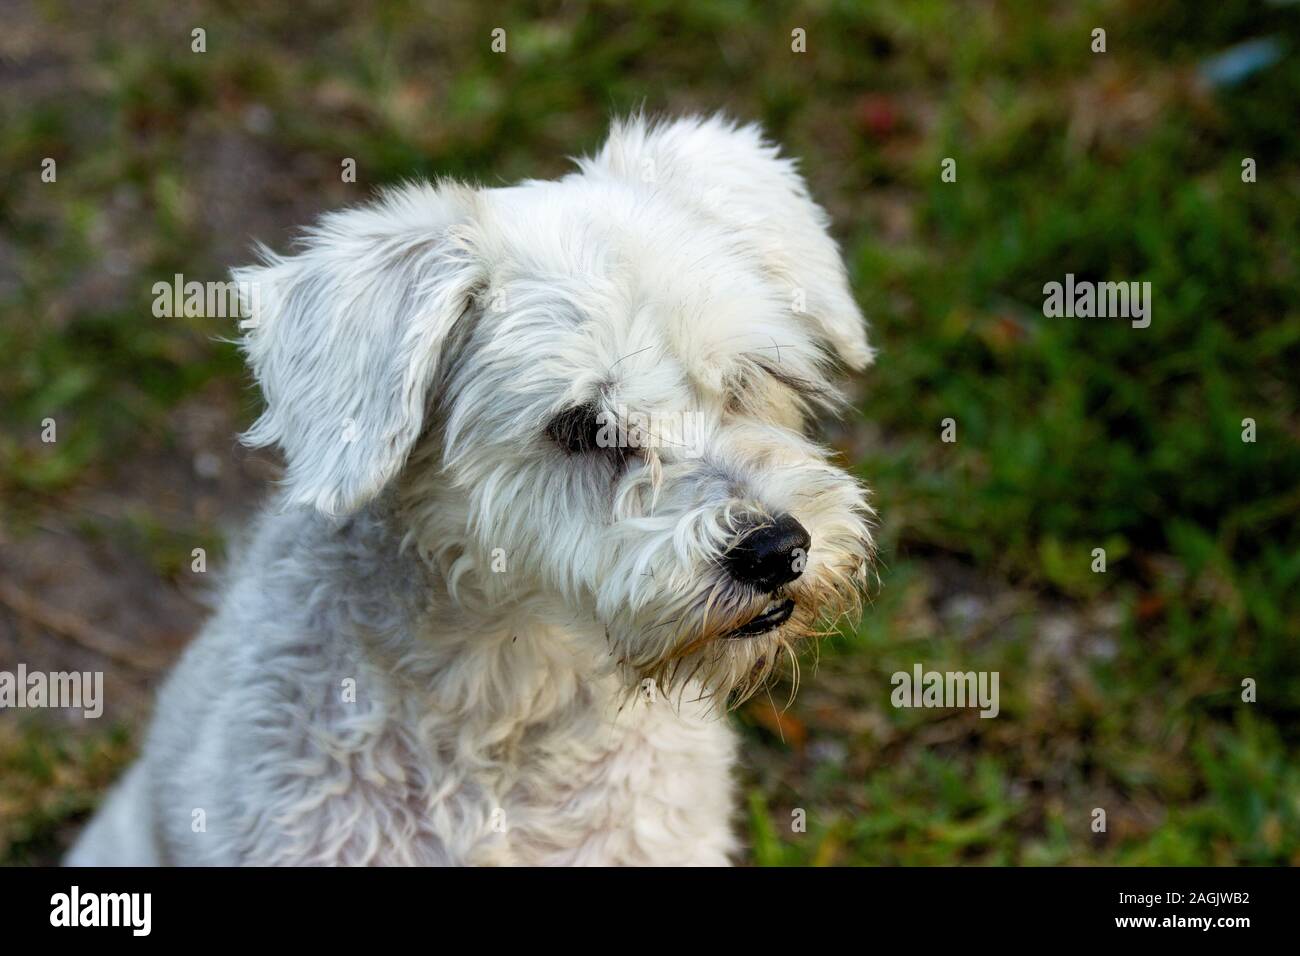 Cute white dog with messy hair Stock Photo - Alamy